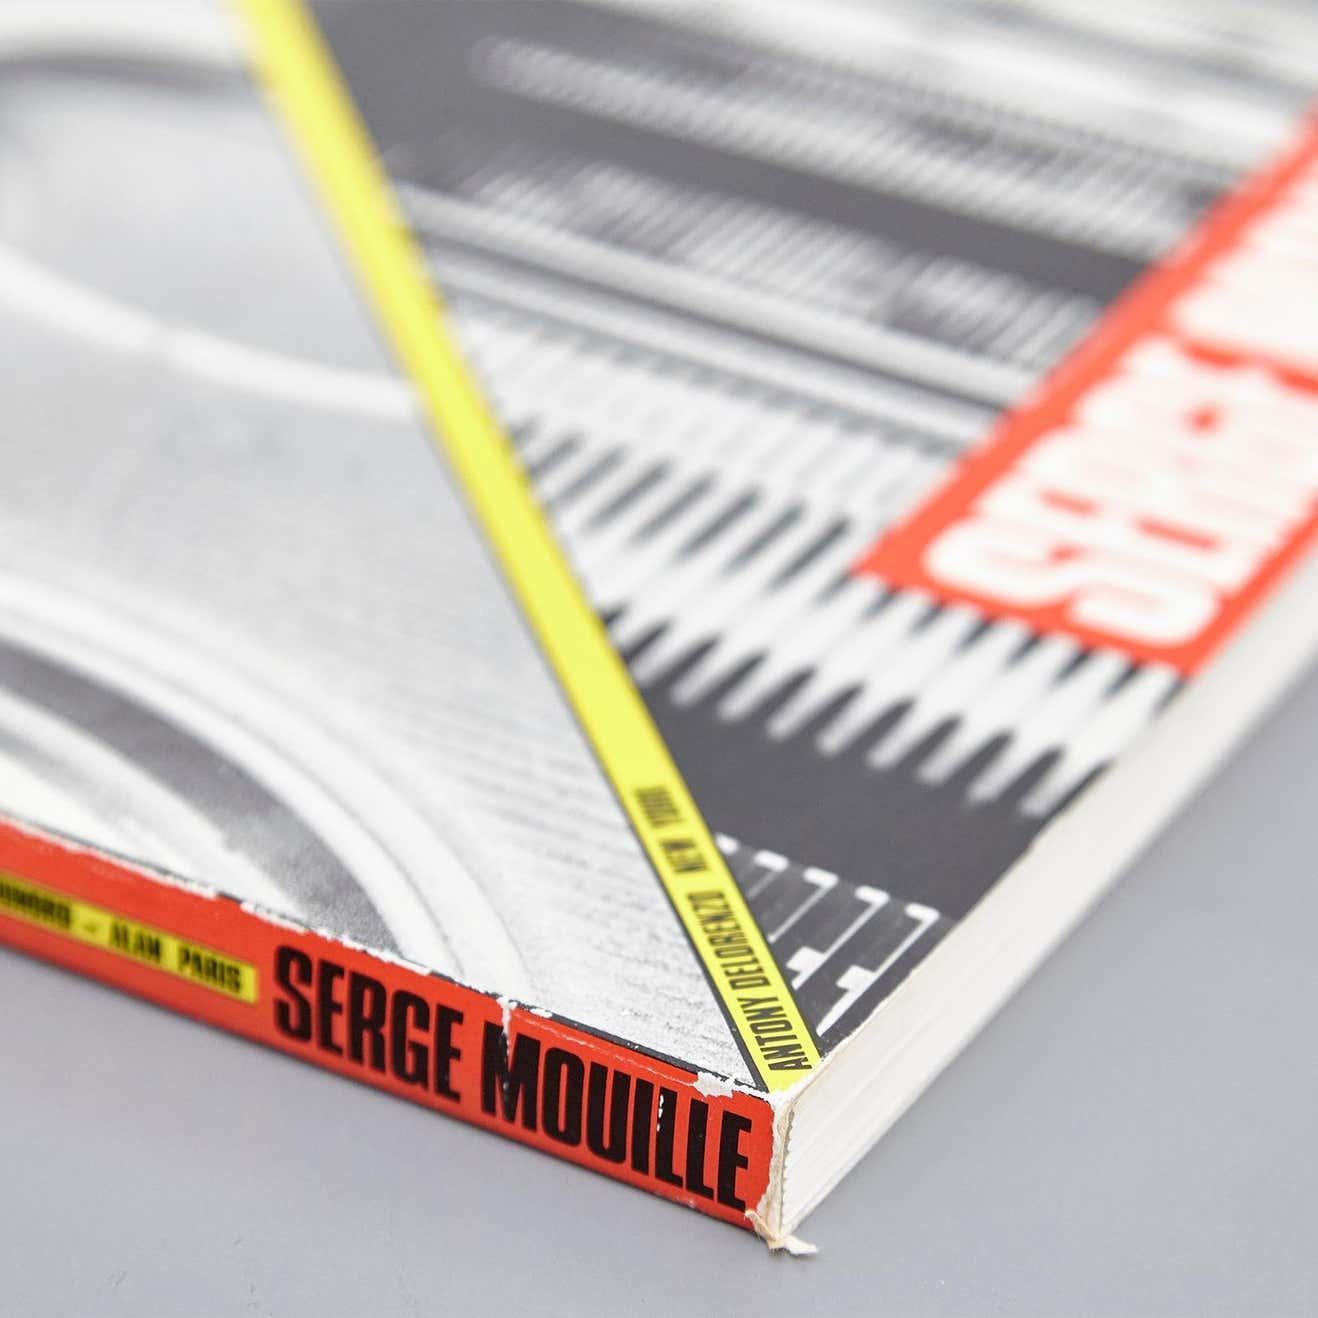 Allemand Jean Prouvé Serge Mouille Mid-Century Modern Two Master Metal Workers Book en vente